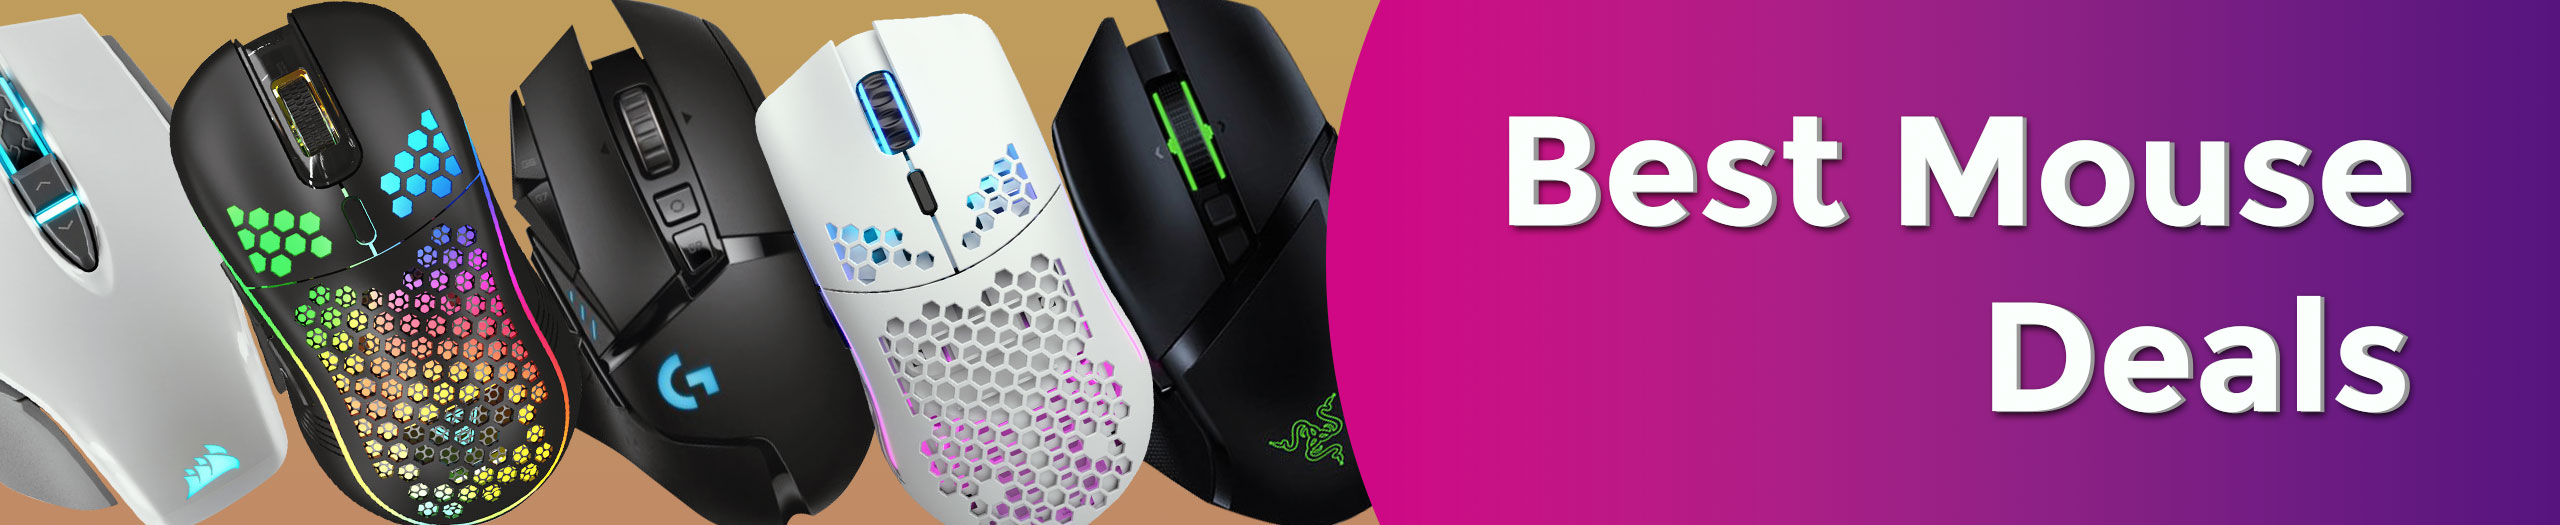 Best Gaming Mouse Deals